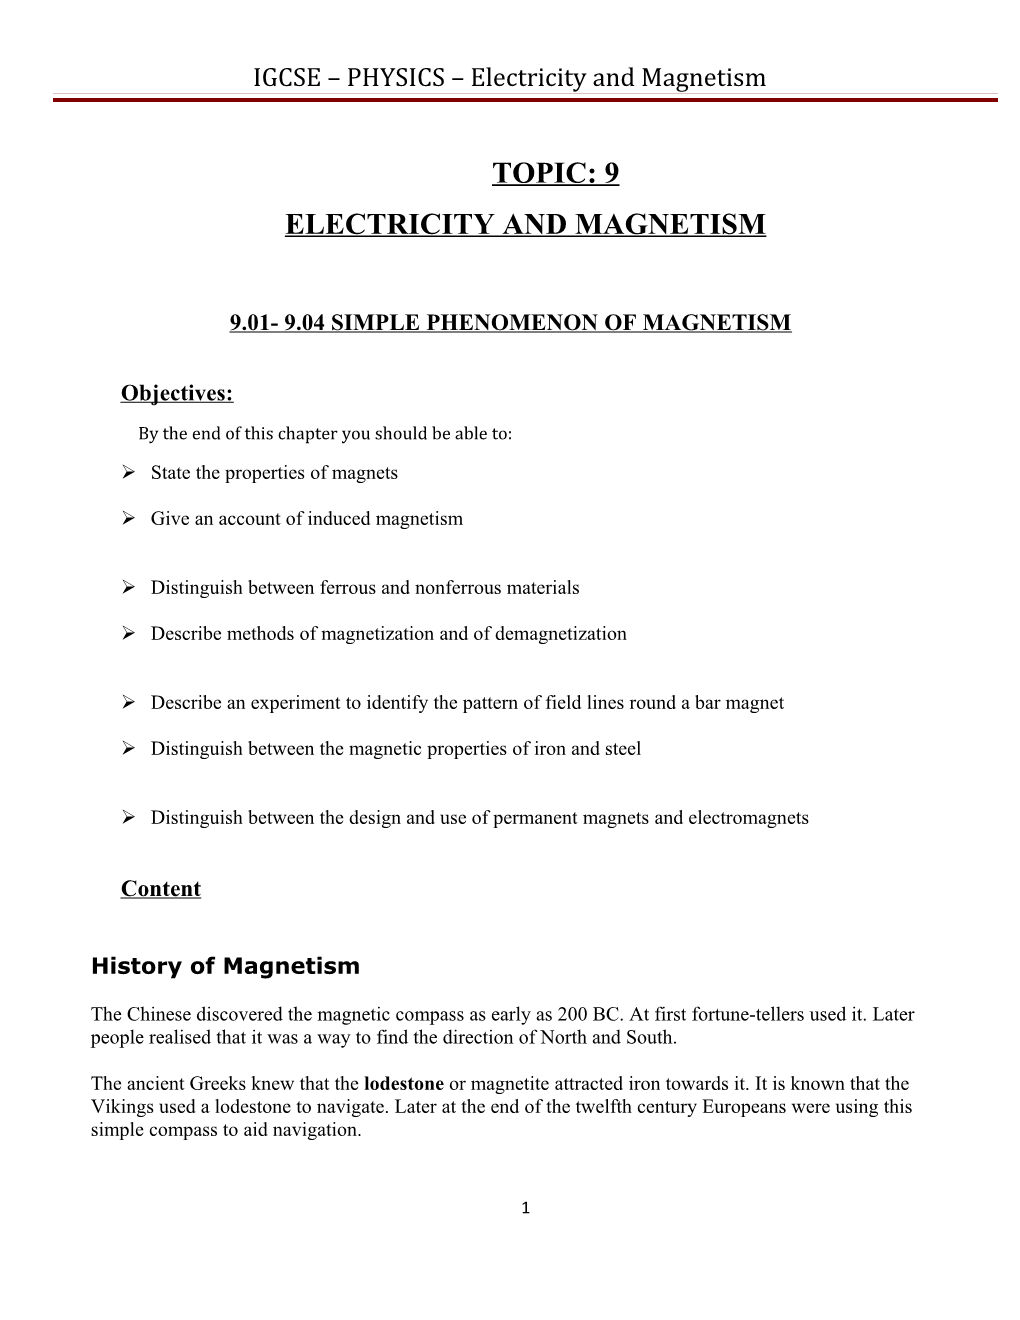 IGCSE PHYSICS Electricity and Magnetism